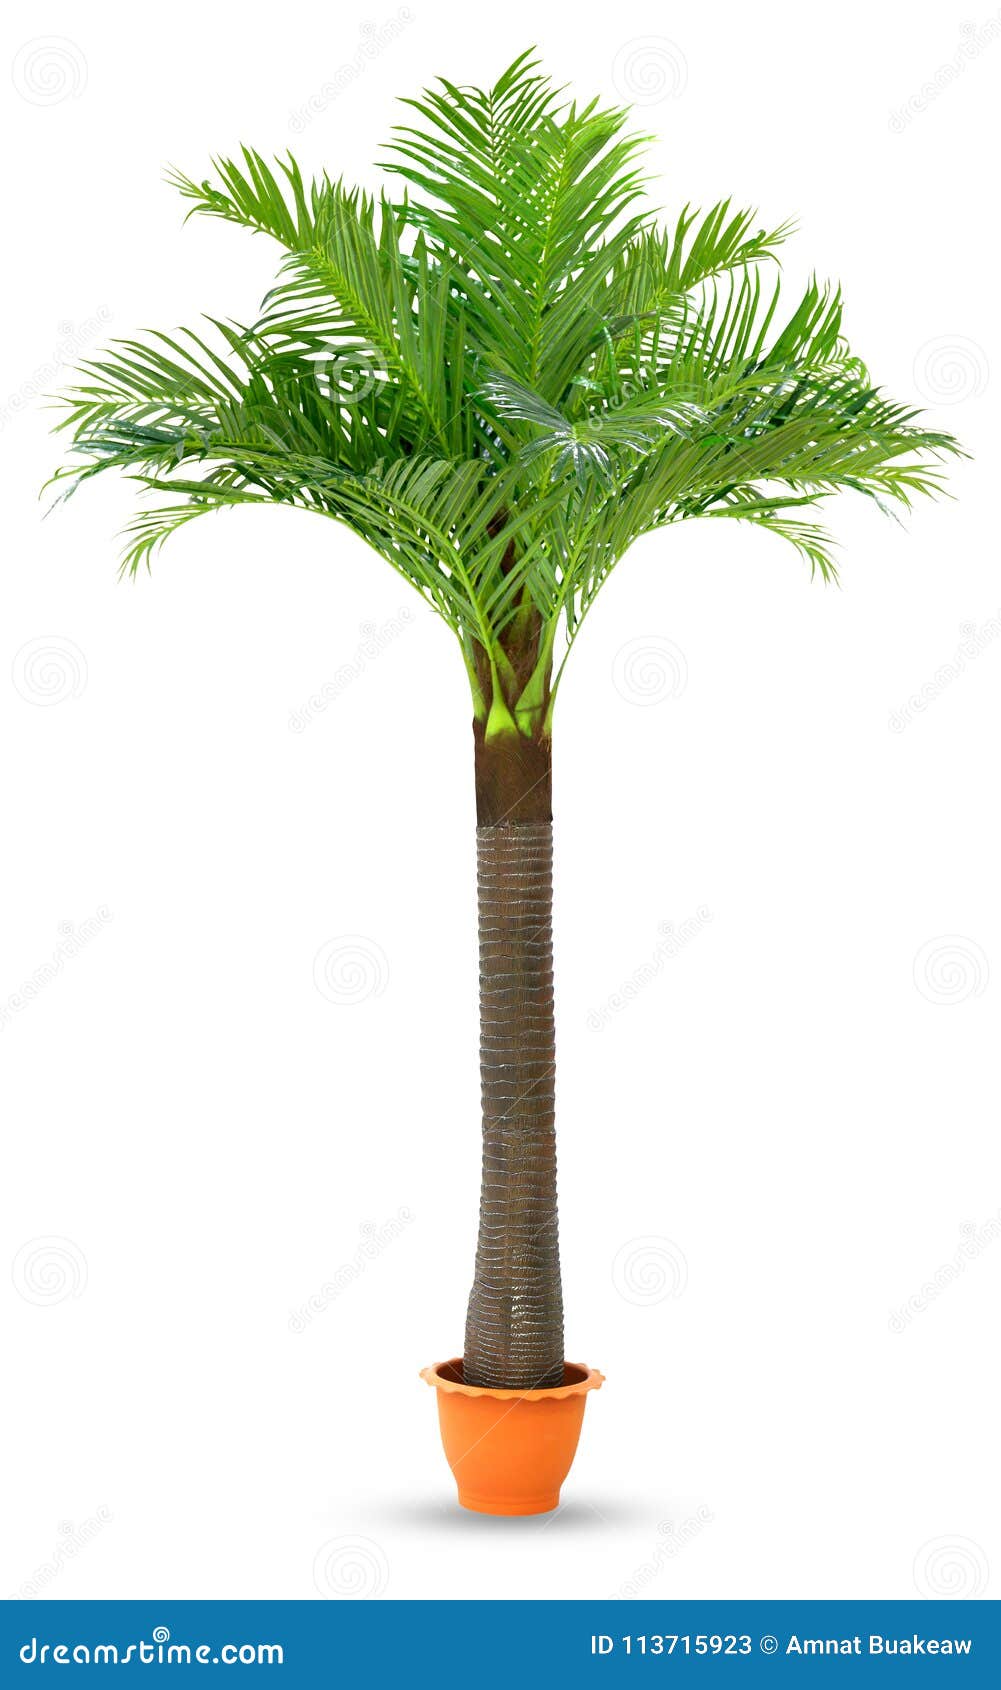 coconut palm tree in pot plastic  white background, coconut tree for decoration booth exhibitions prop display garden